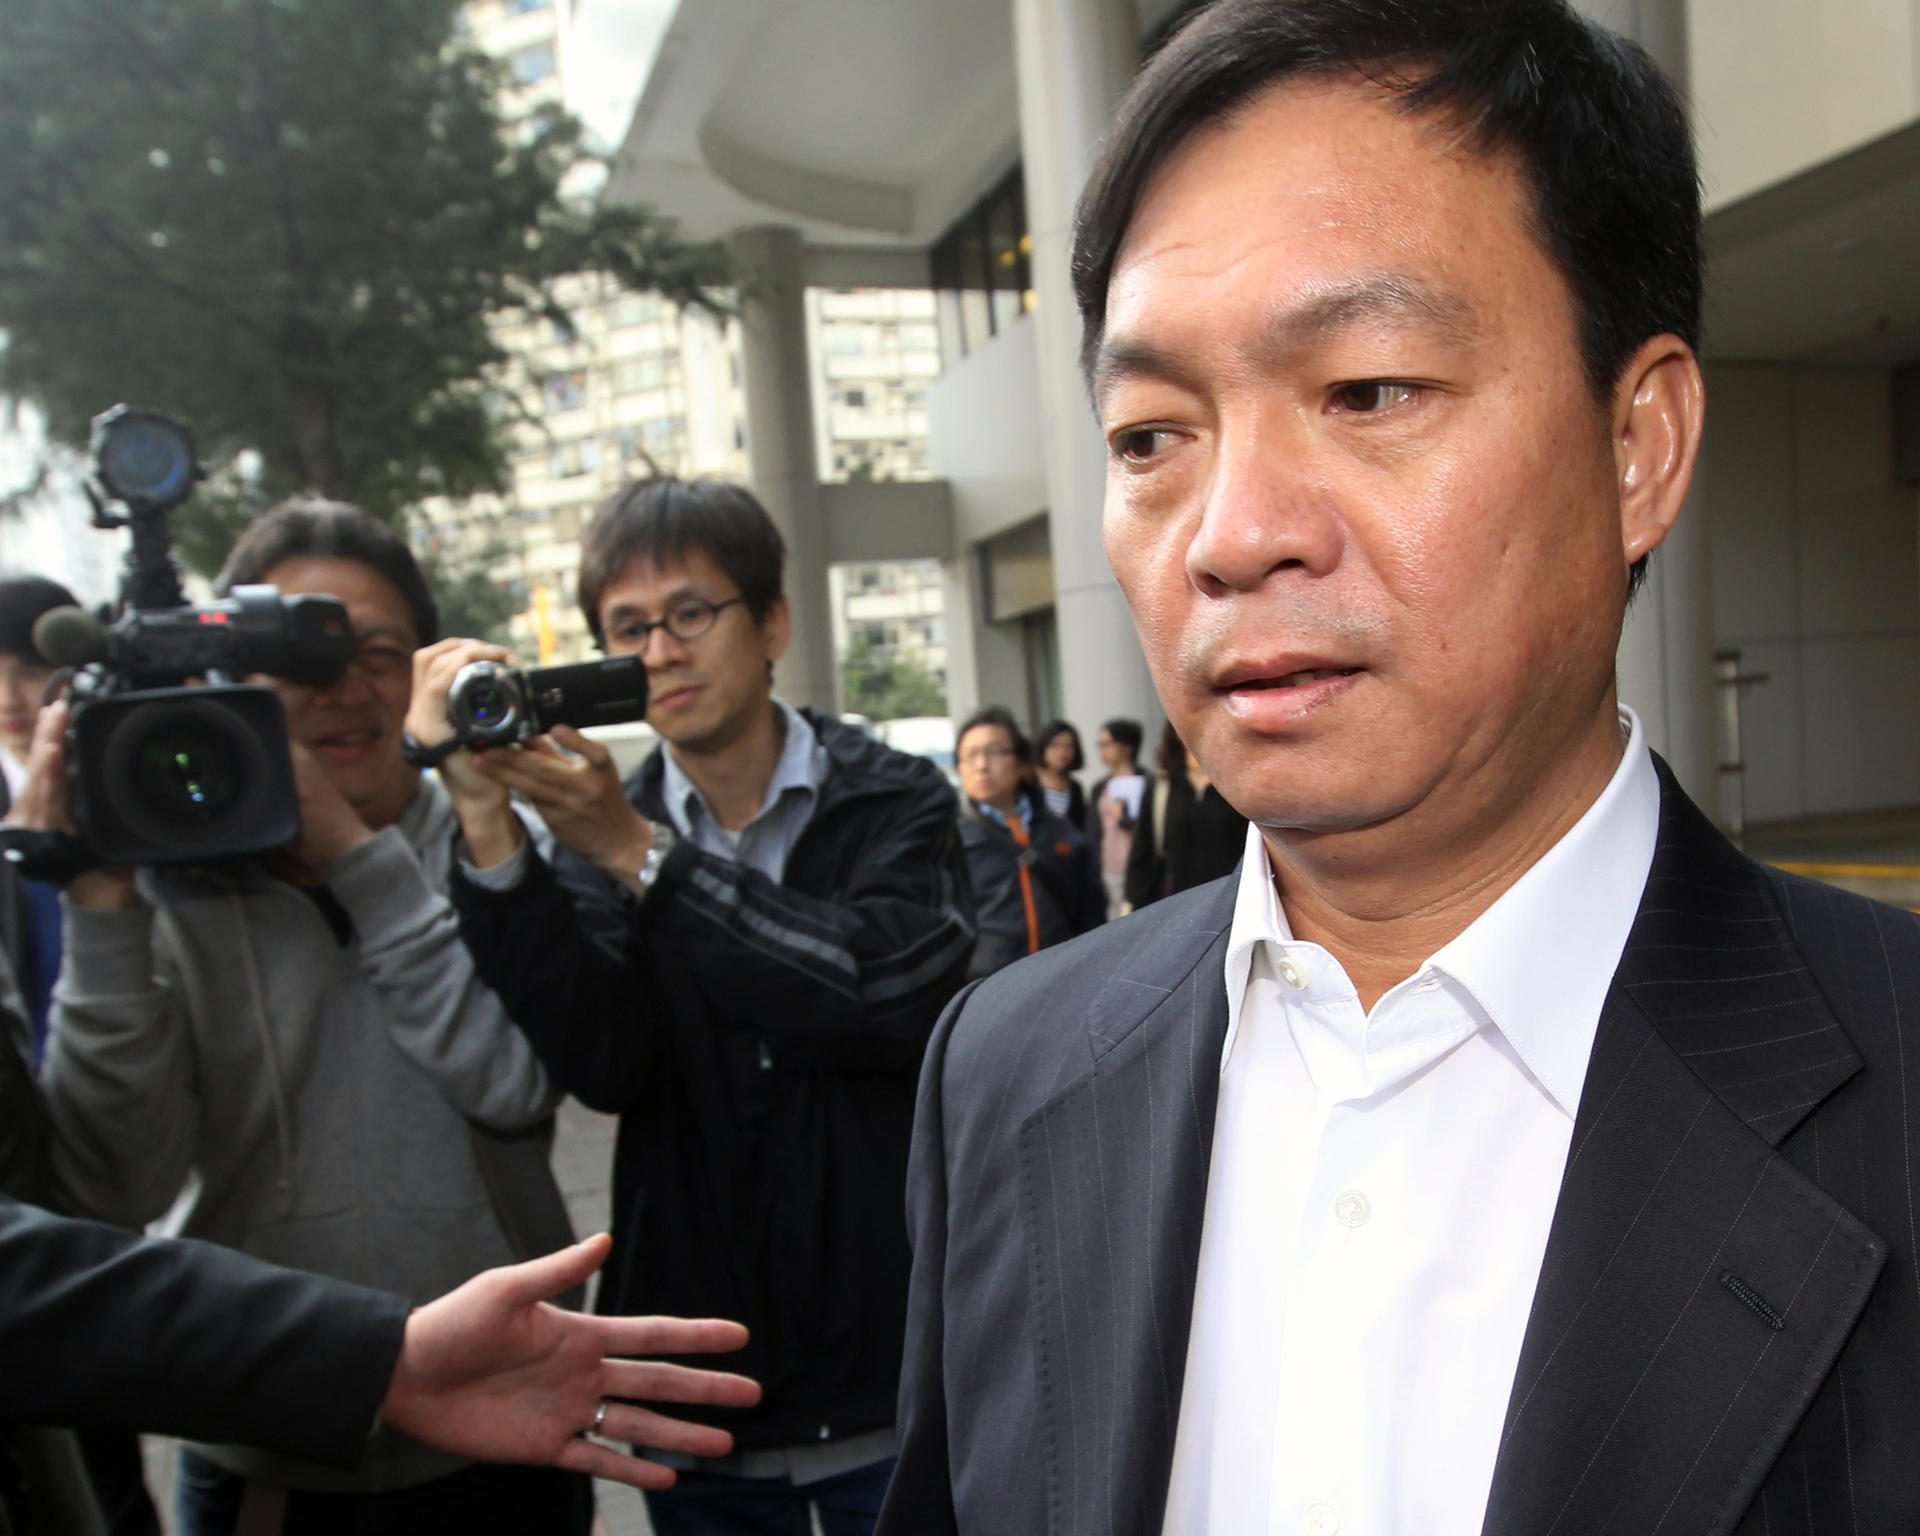 Chen Zhuolin has been ordered to stay at a designated residence while investigations continue.